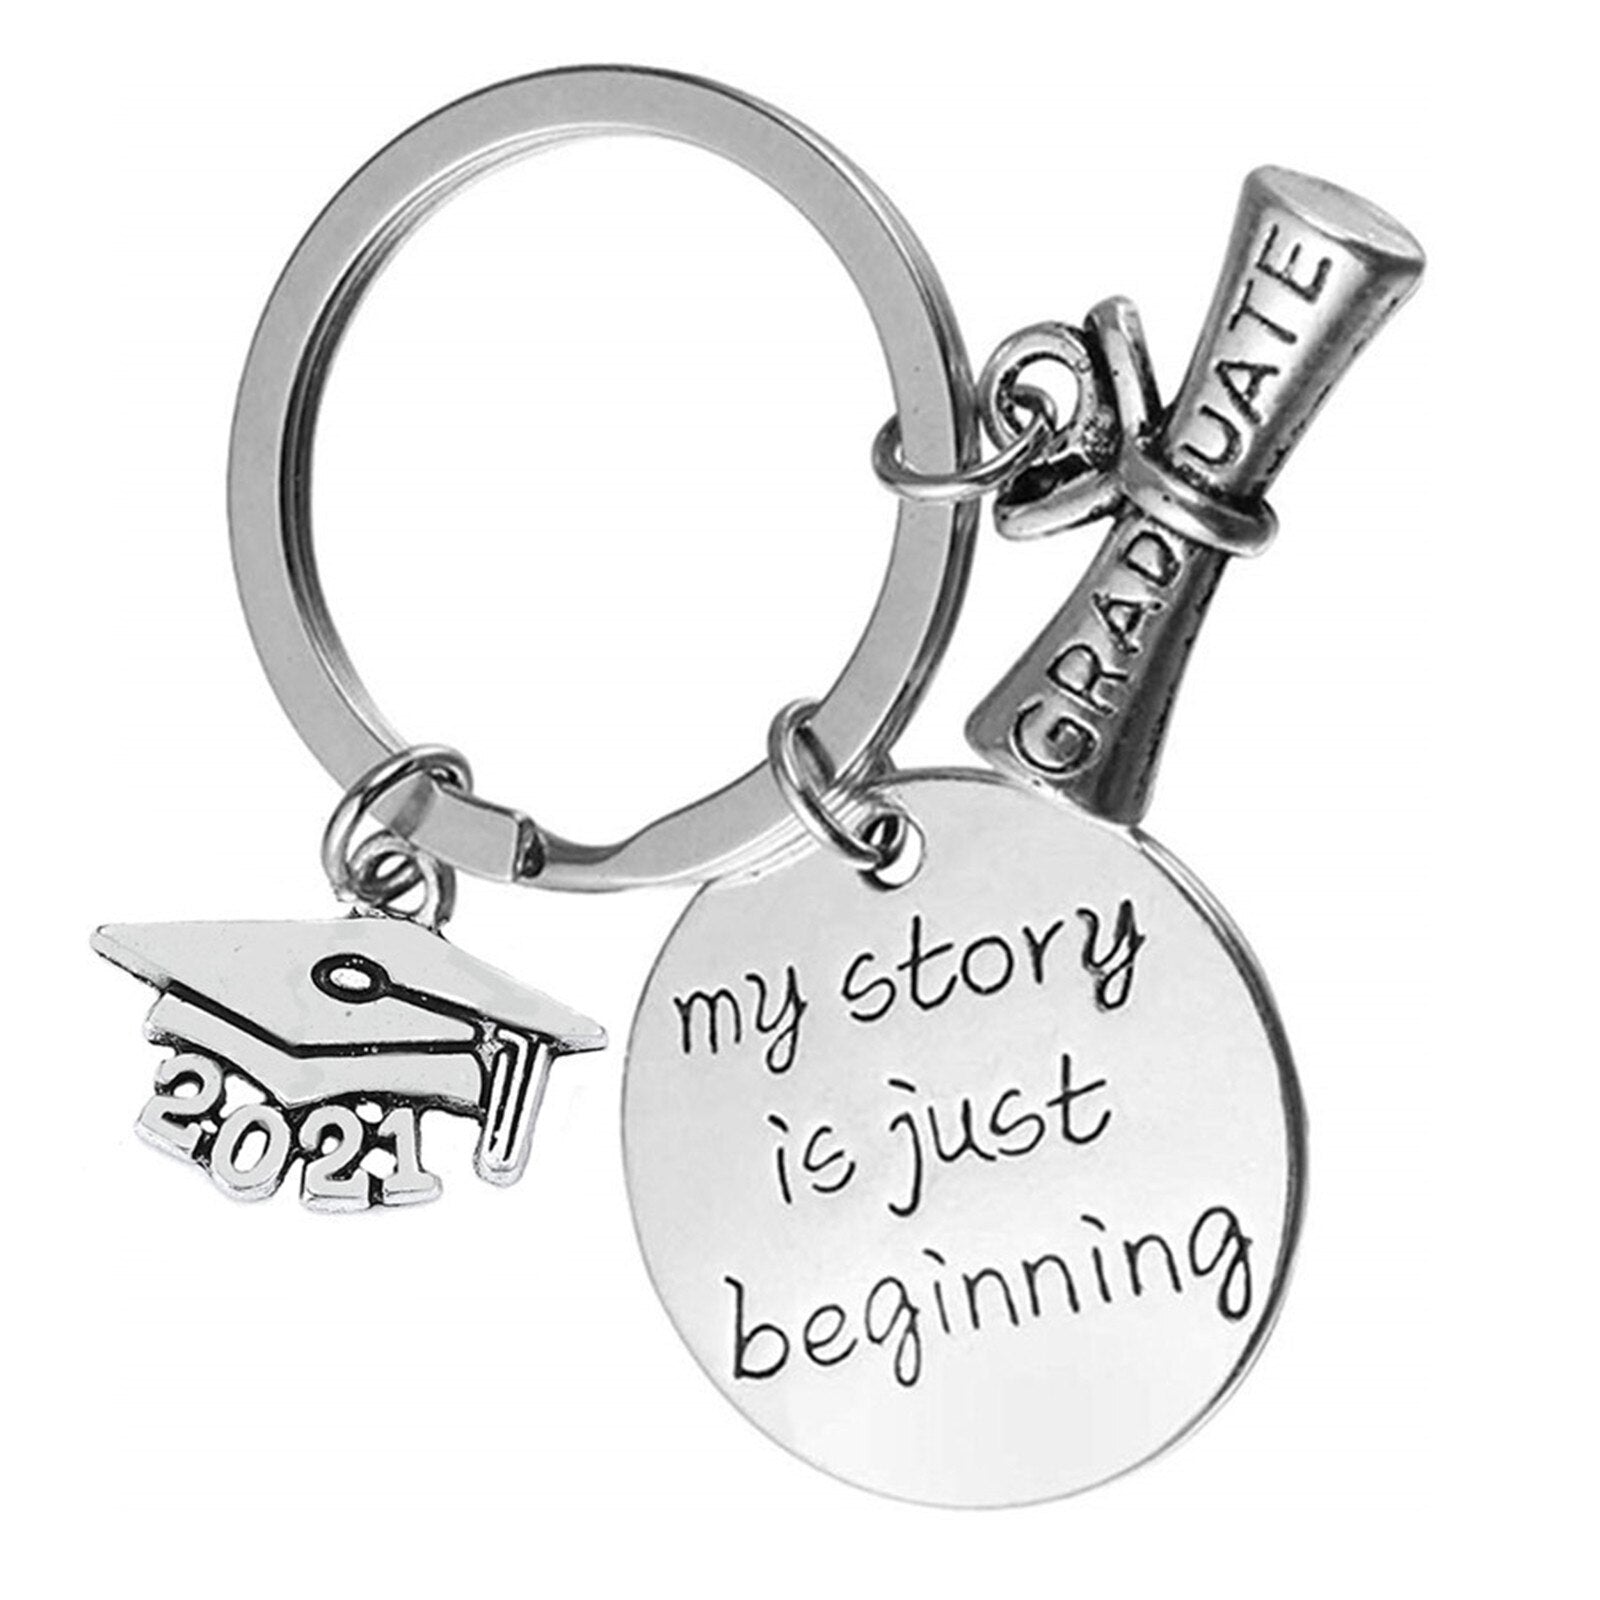 New Class Of 2021 School Keychain Keyring Memorial Graduation Gift Stainless Steel Carry Bag Key Multifunction Key Chain Instock - 200000174 Find Epic Store